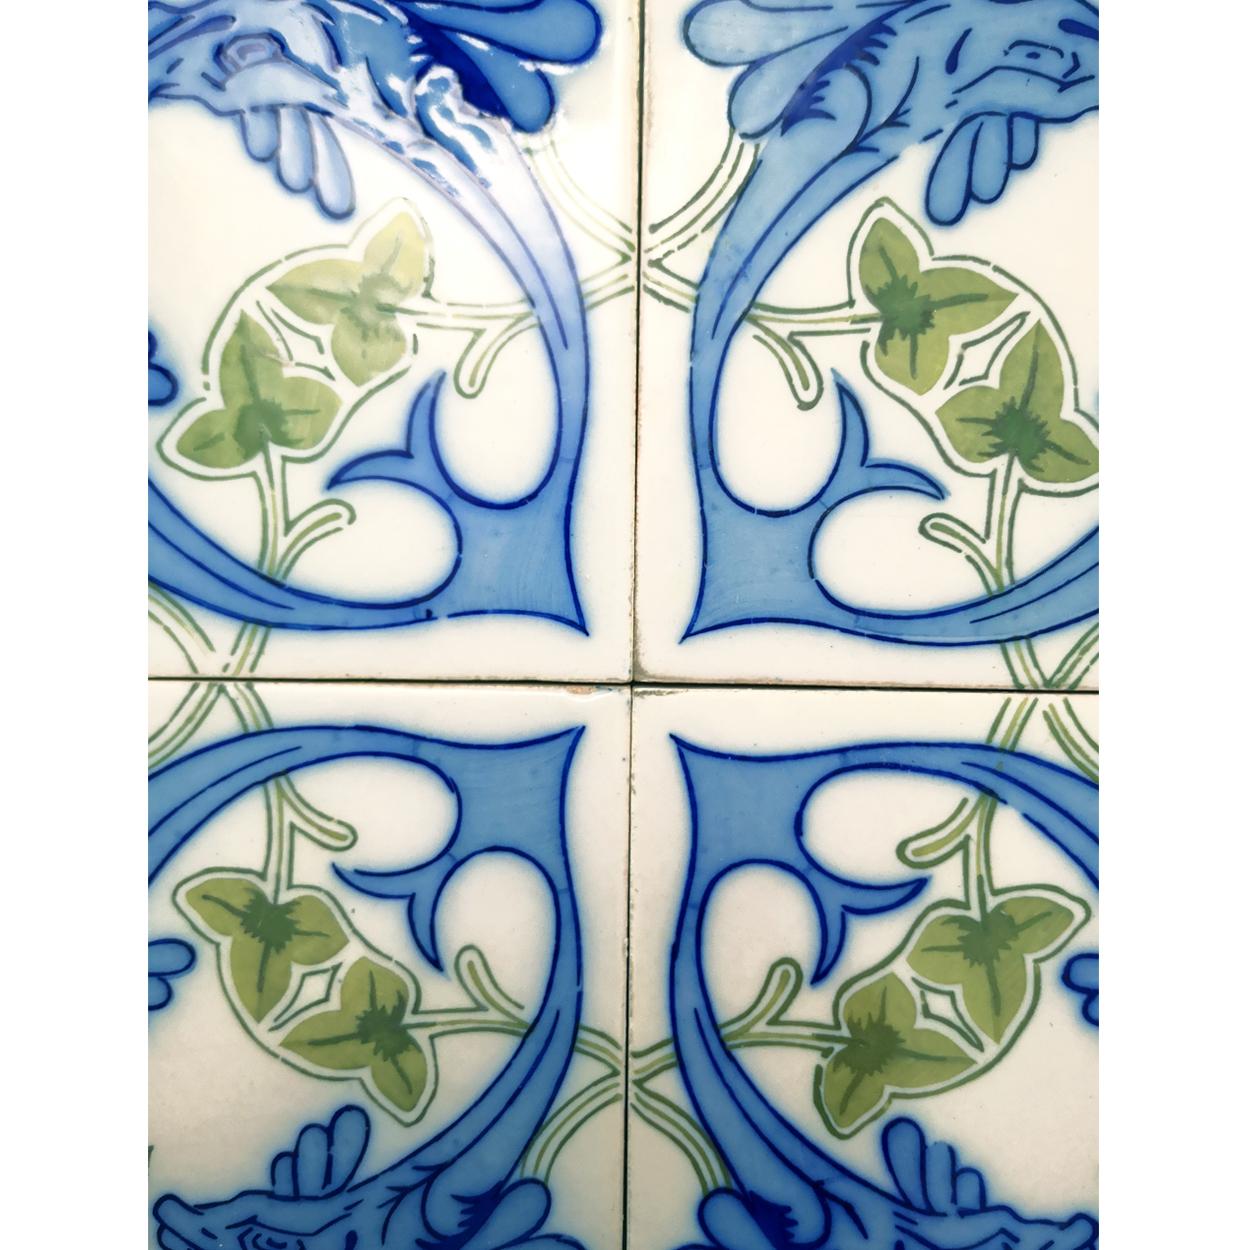 Glazed Set of Unique Antique 32 Ceramic Tiles with Fisch by Onda, Spain, circa 1900 For Sale